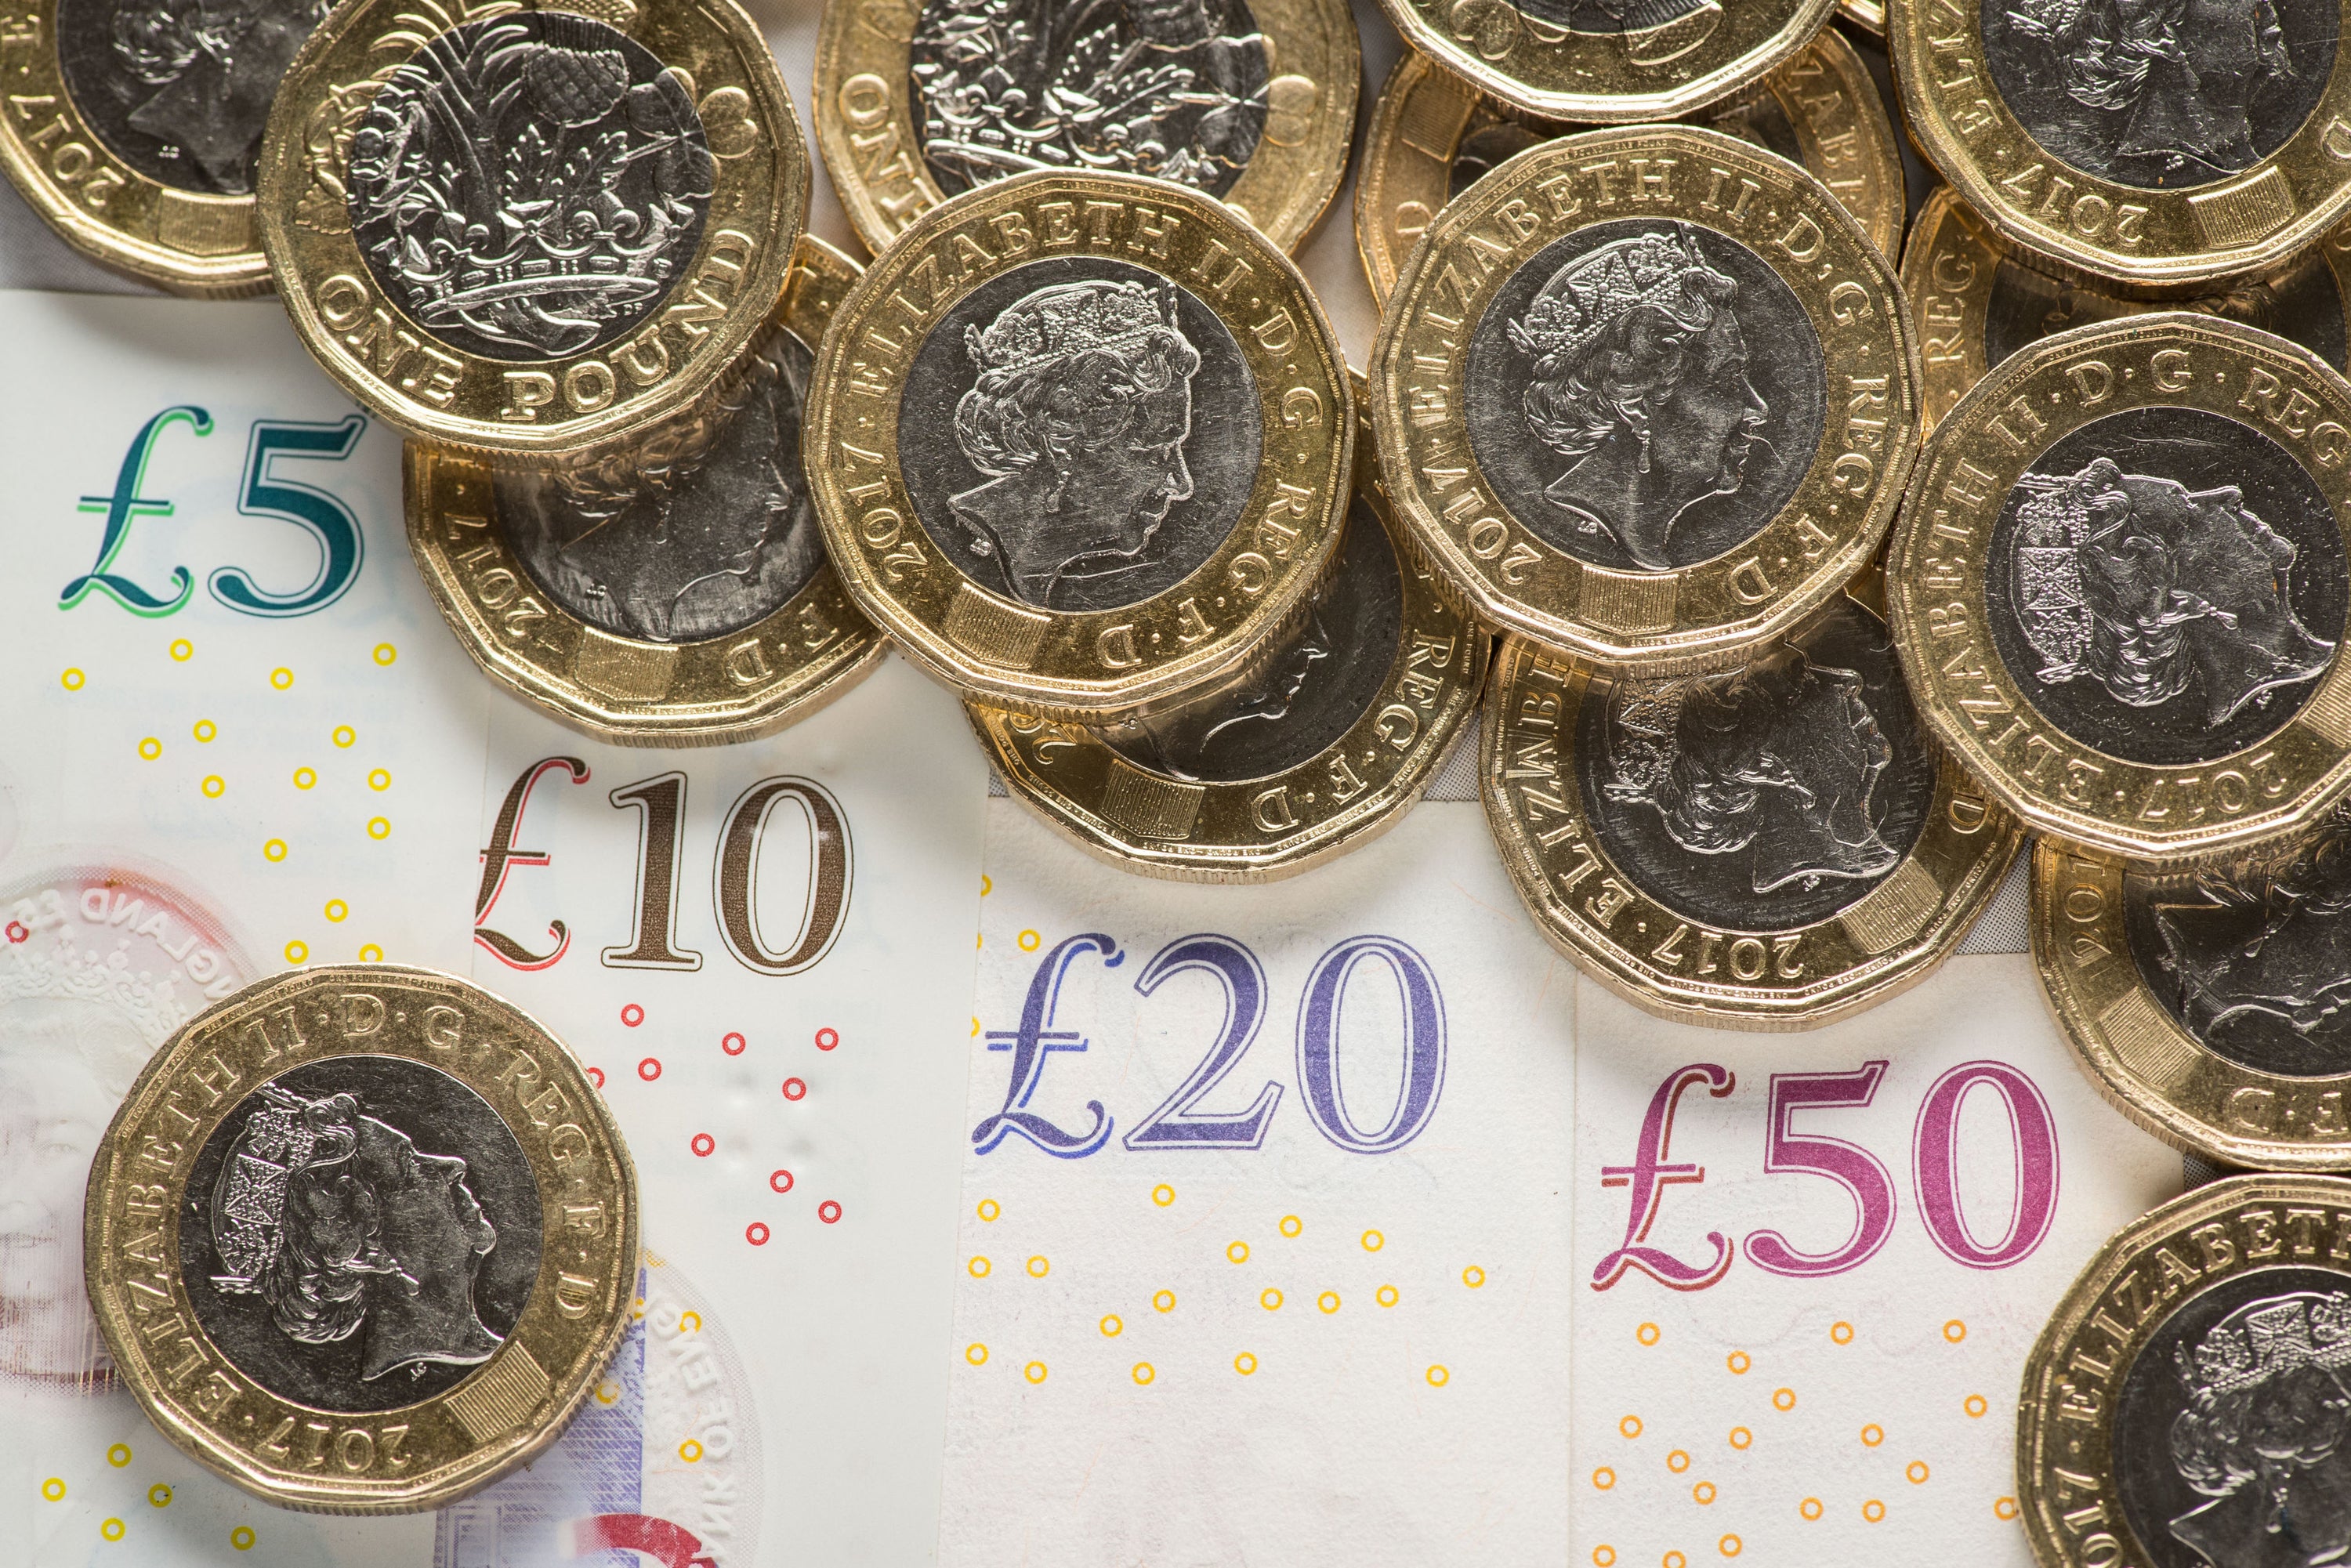 No longer welcome? An increasing number of businesses are going cash-free